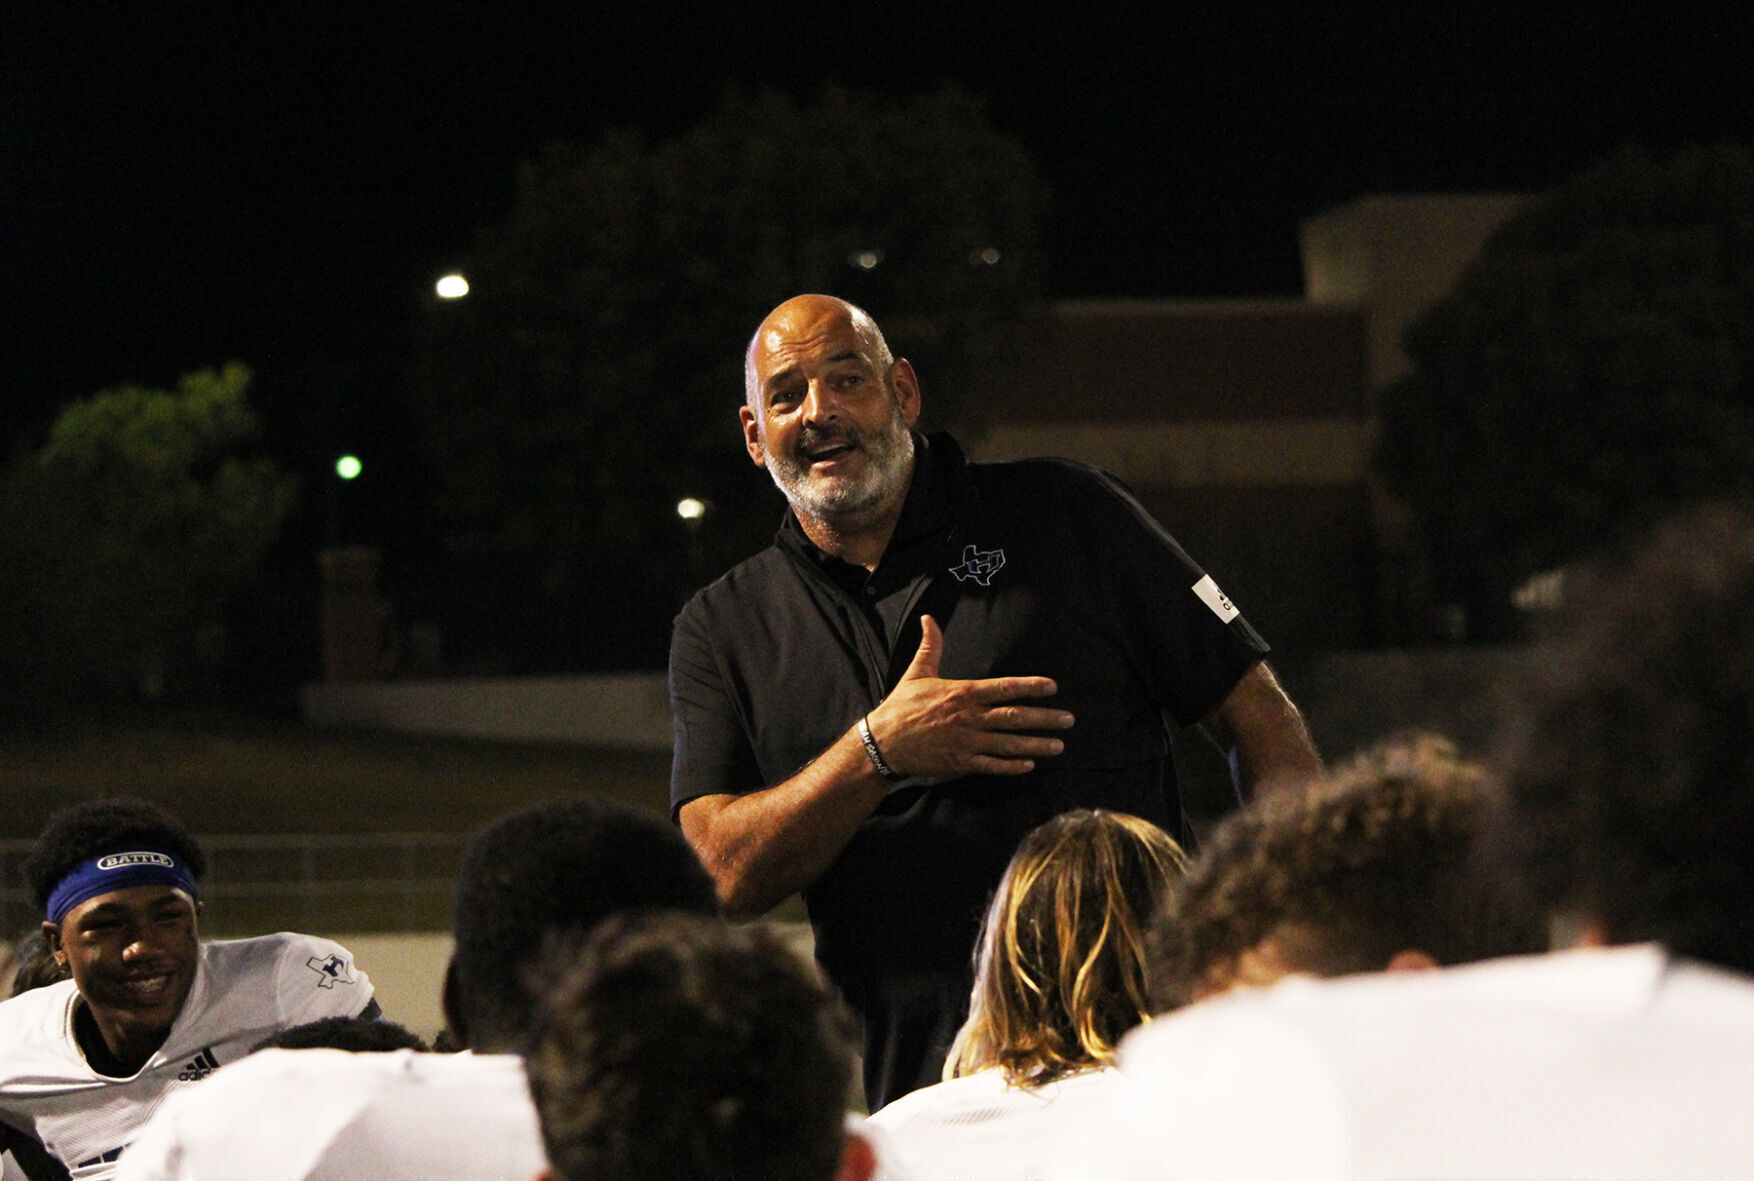 Hebron Coach and TCU FCA Leader to be Inducted into FCA Hall of Champions